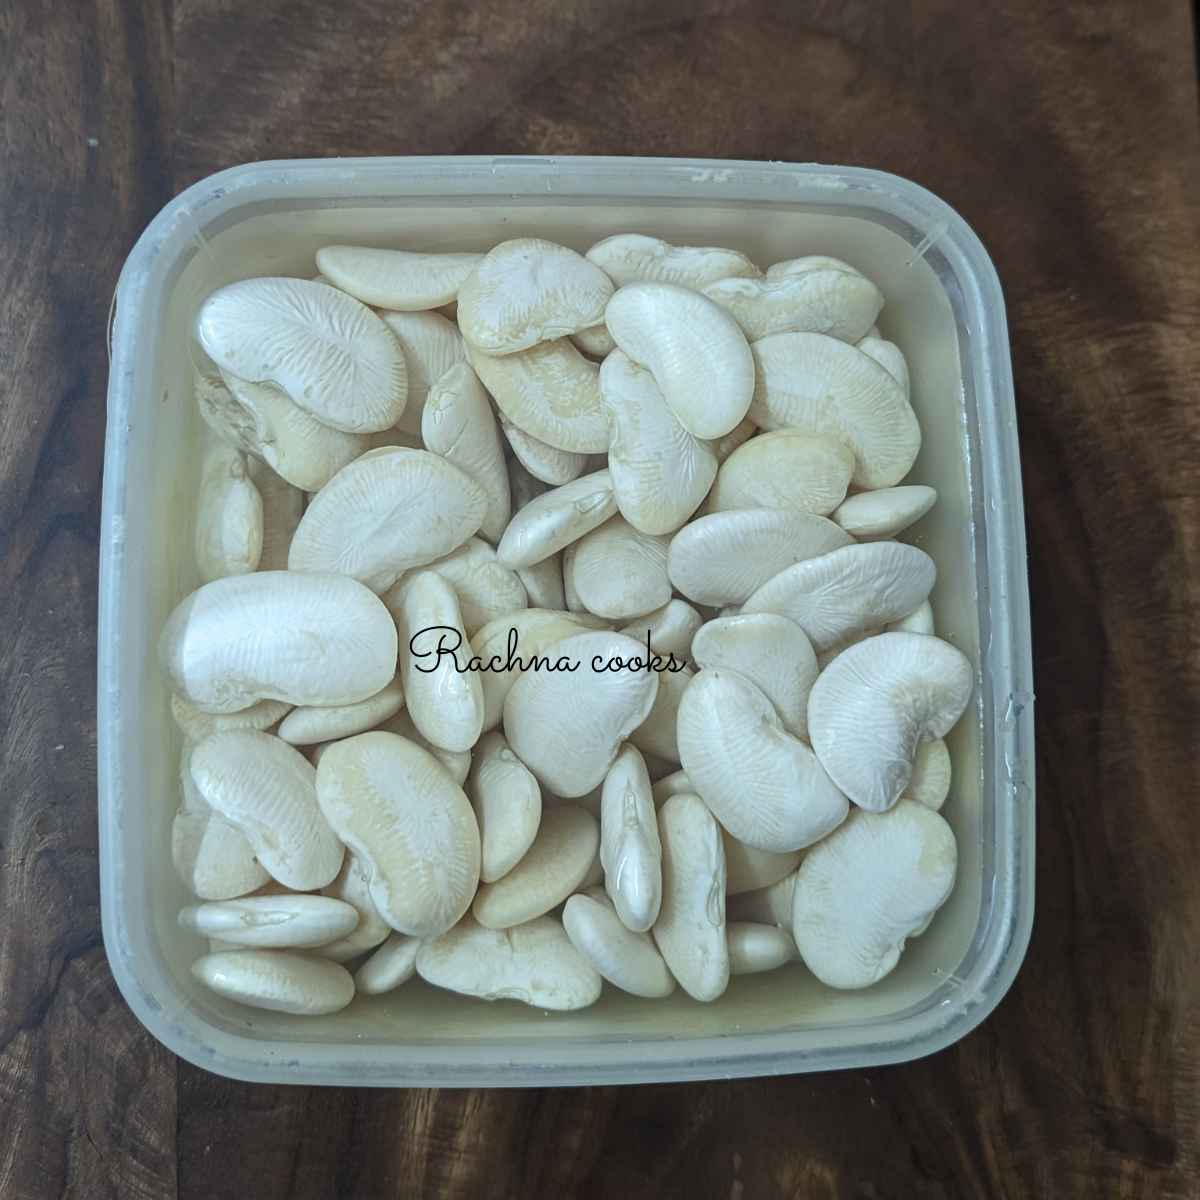 Dried butter beans soaked in water